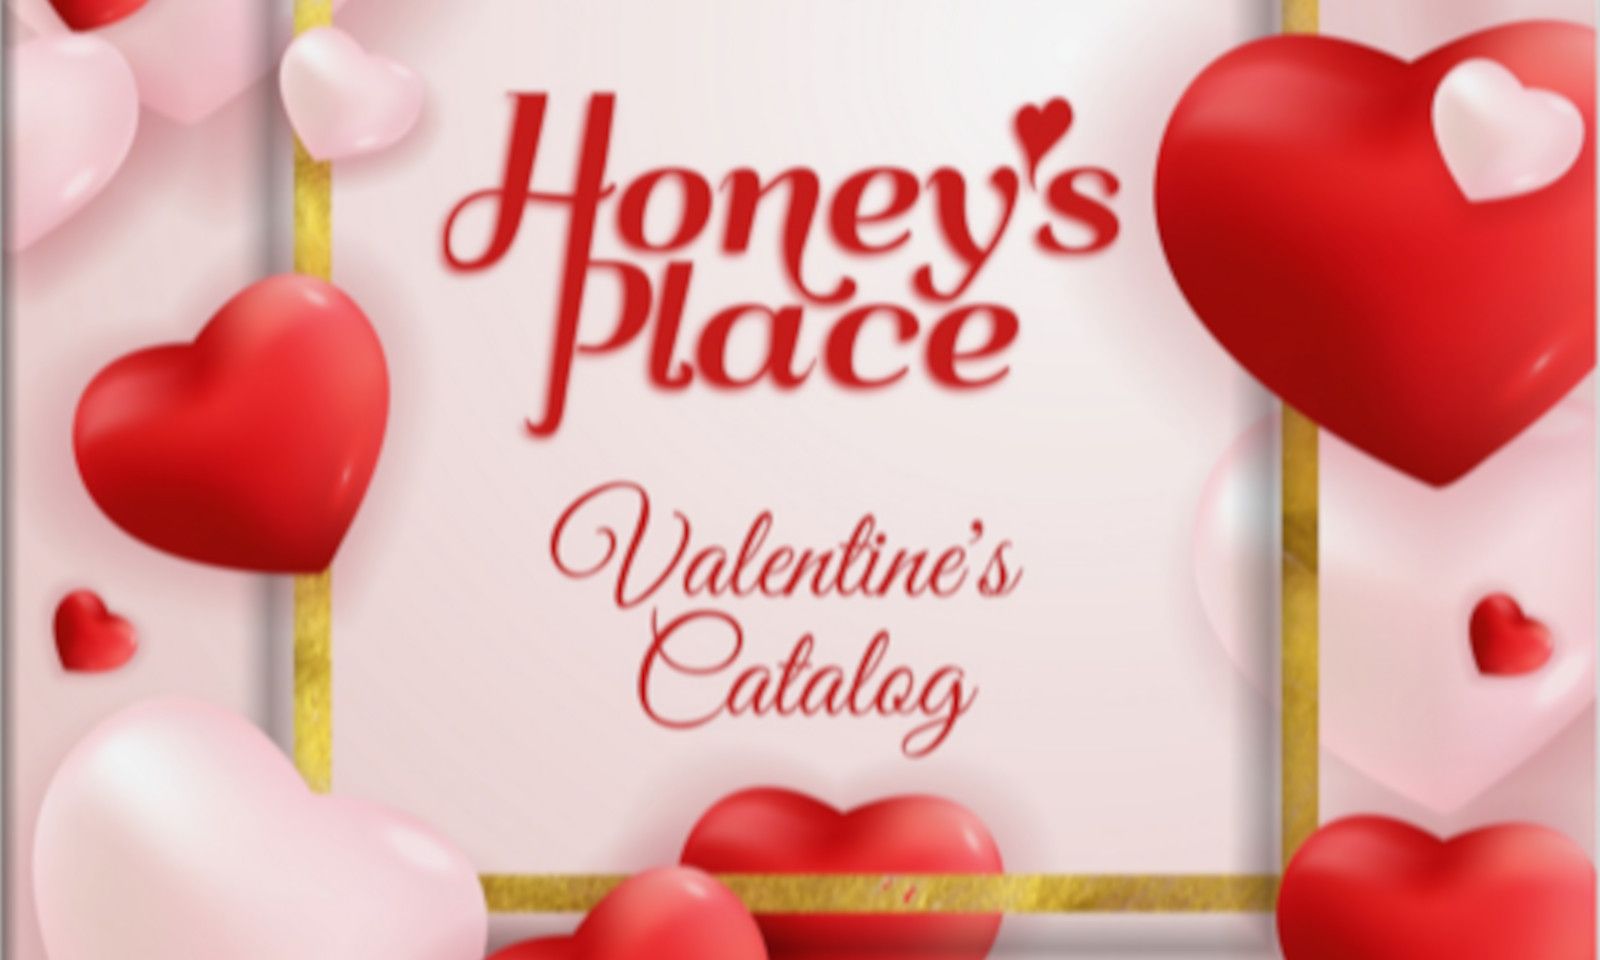 Honey's Place Releases Its Valentine's Day Catalog